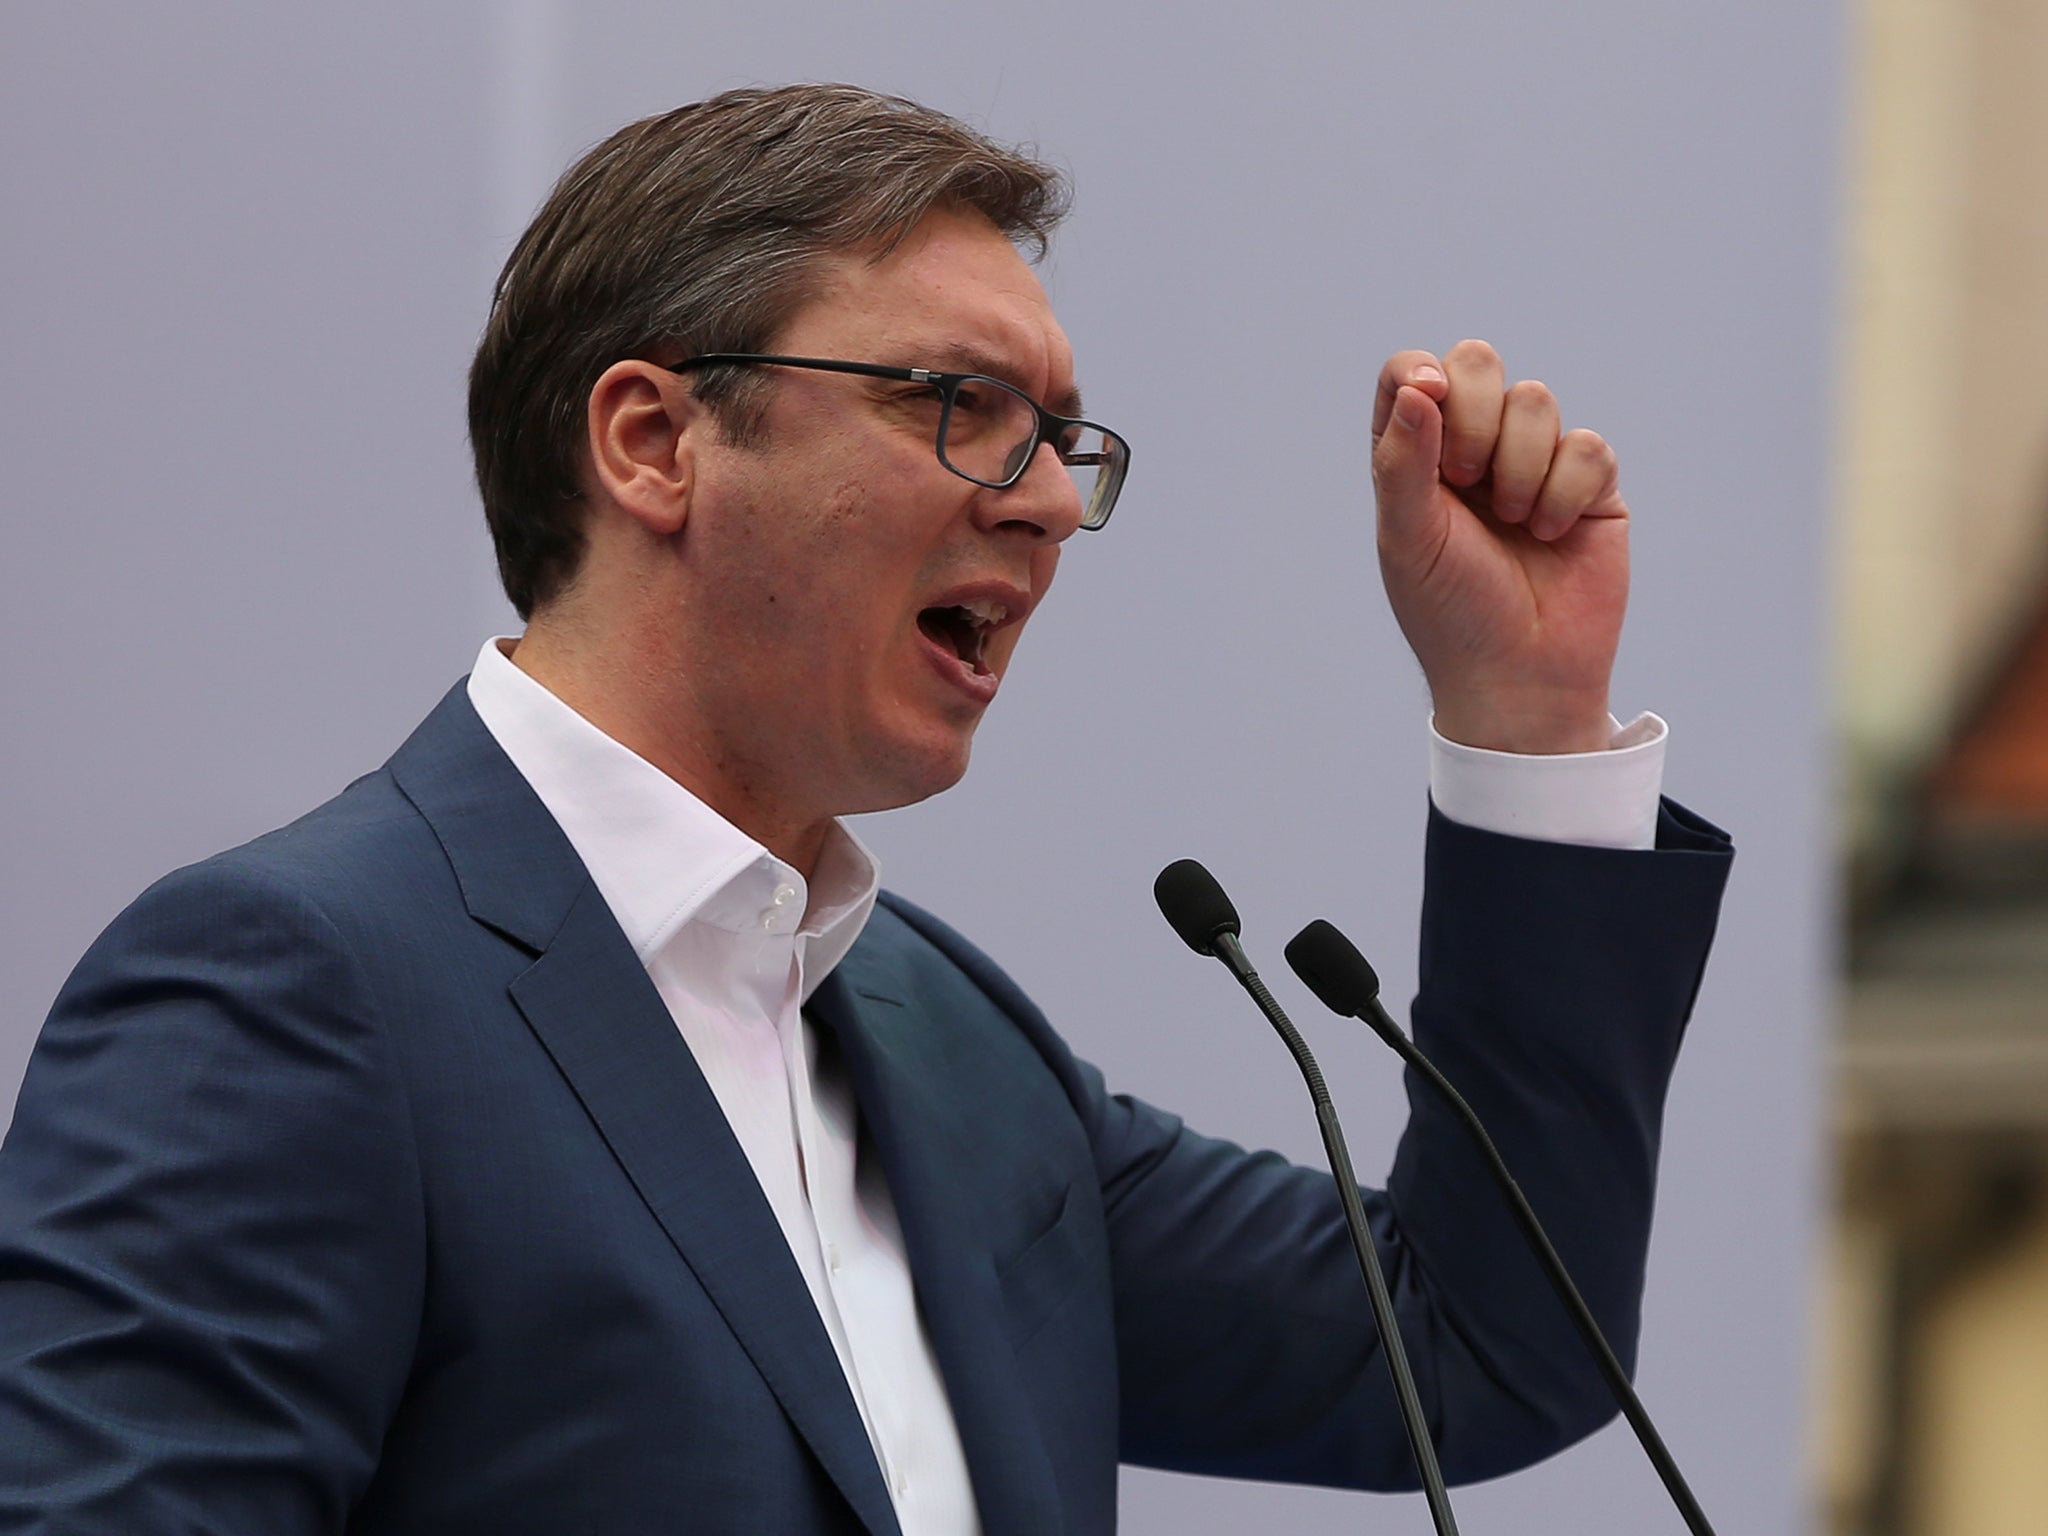 President Aleksandar Vucic was unharmed after the luxury vehicle crashed into his car during an alleged attack near his residence in Belgrade on Saturday, it is claimed.